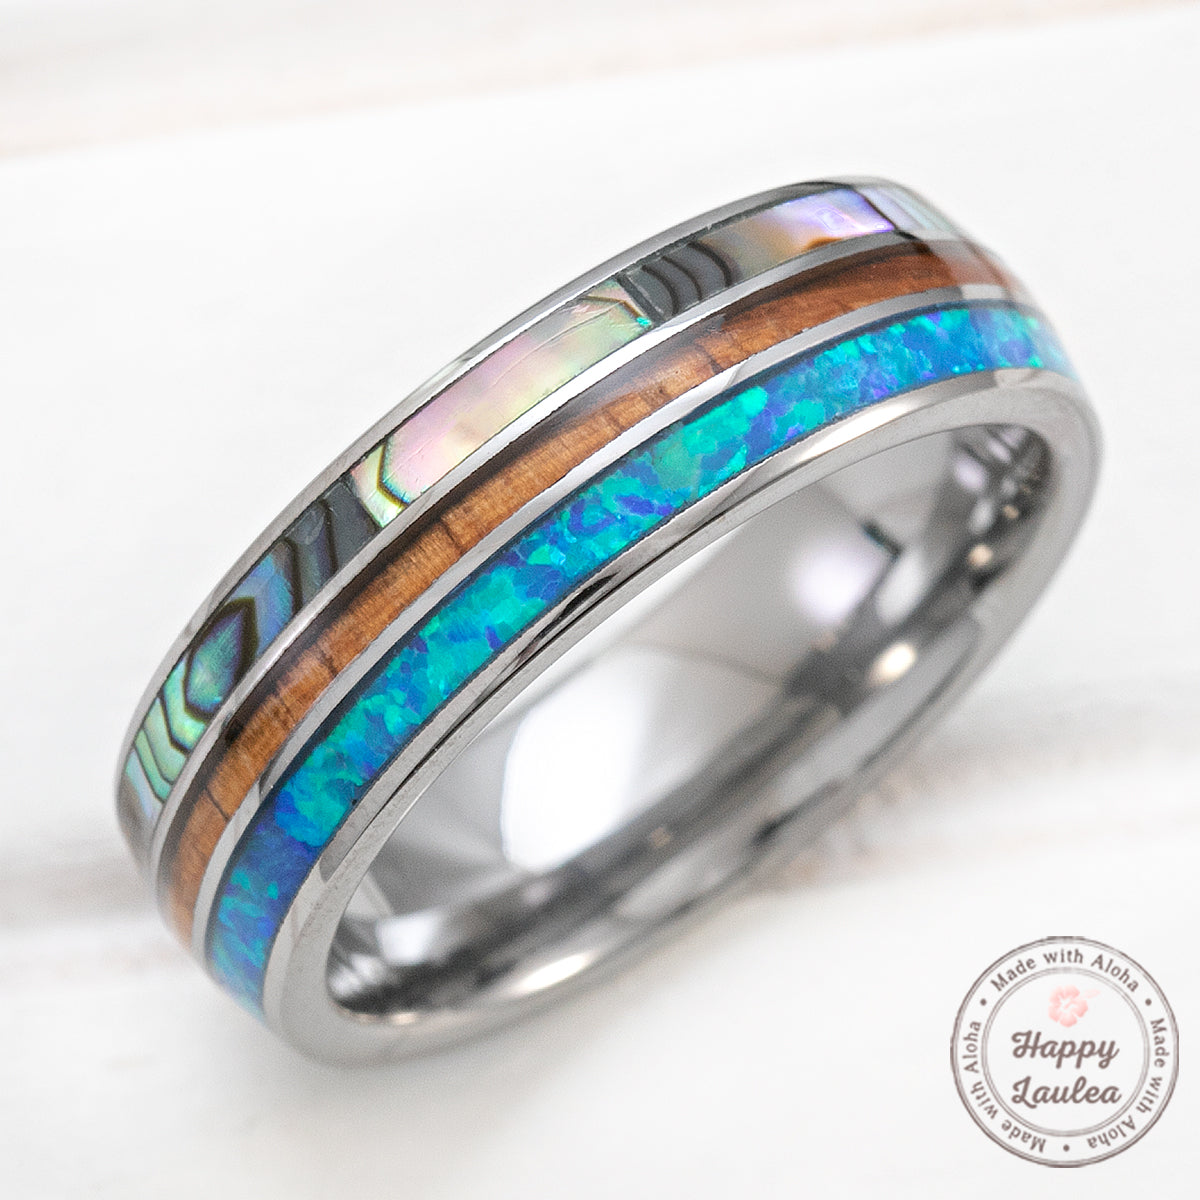 Tungsten Carbide 6mm Ring with Abalone Shell, Koa Wood, & Opal Tri- Inlay - Dome Shape, Comfort Fitment